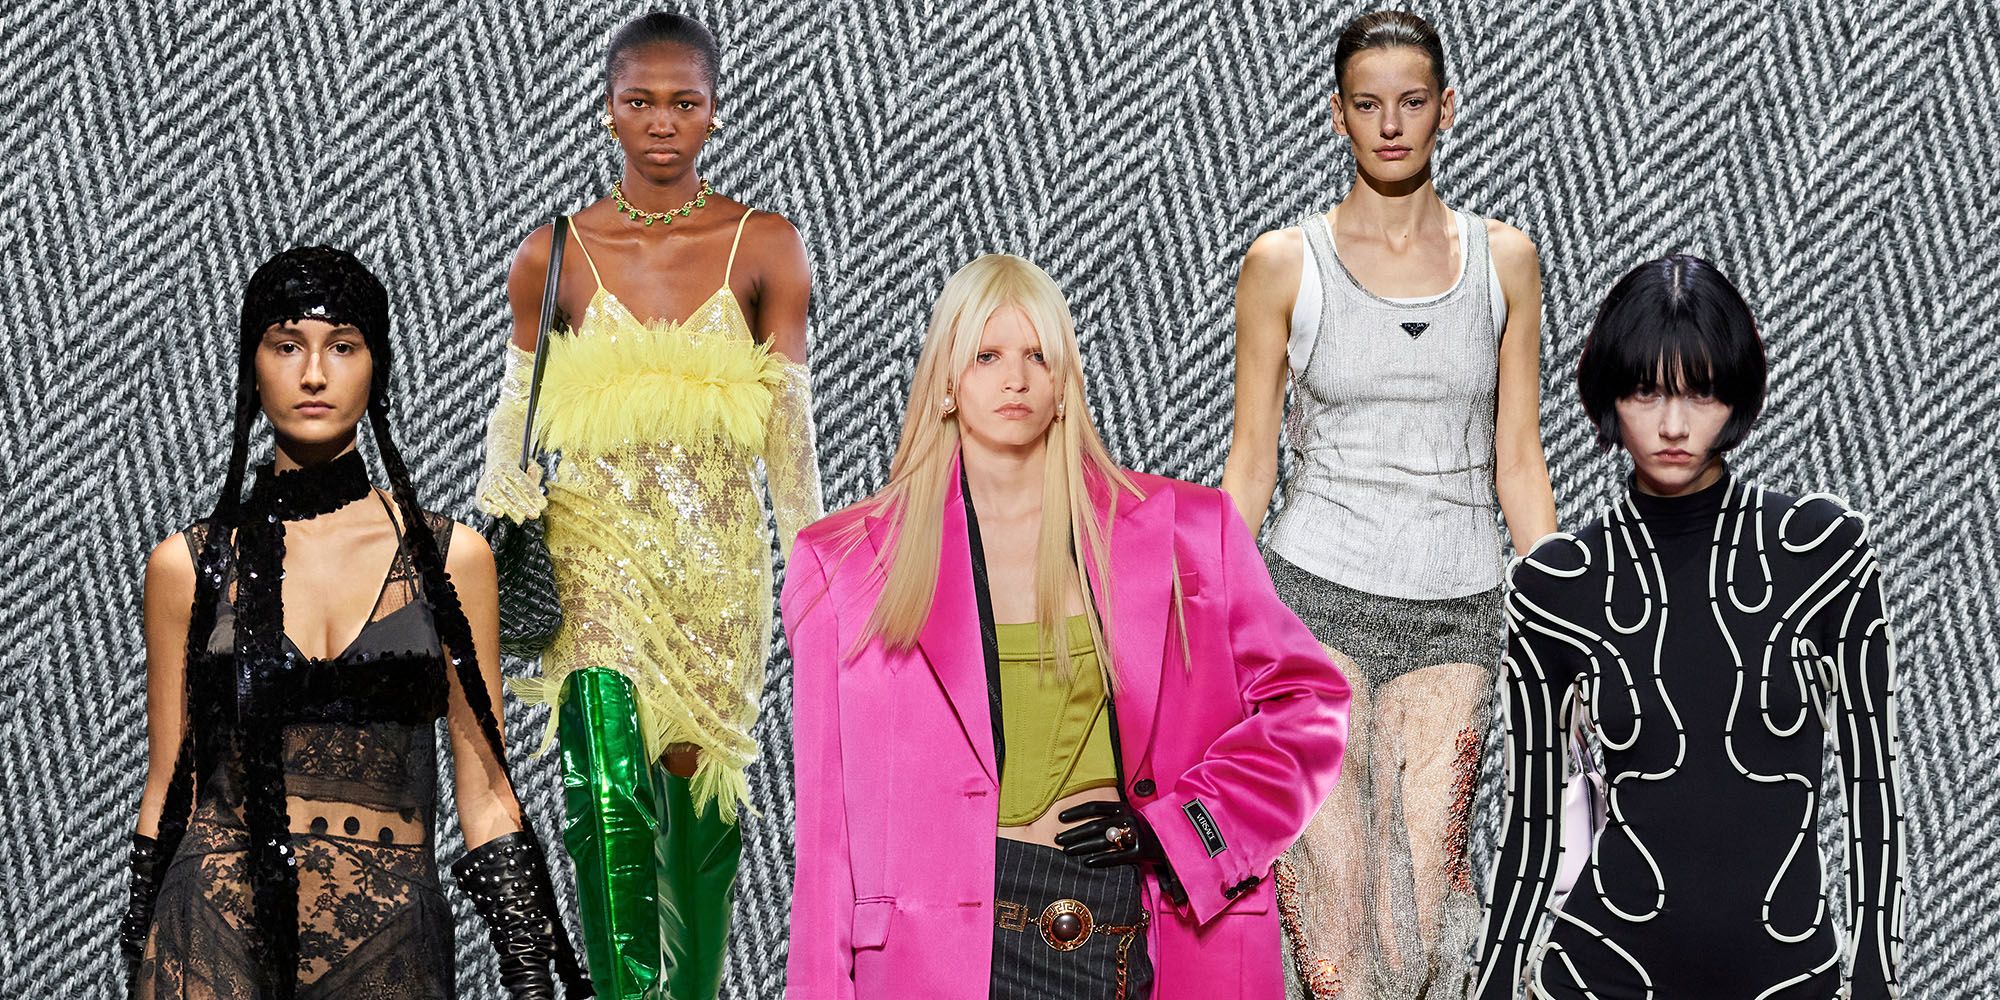 3 trends every boutique buyer should know about for AW22/23